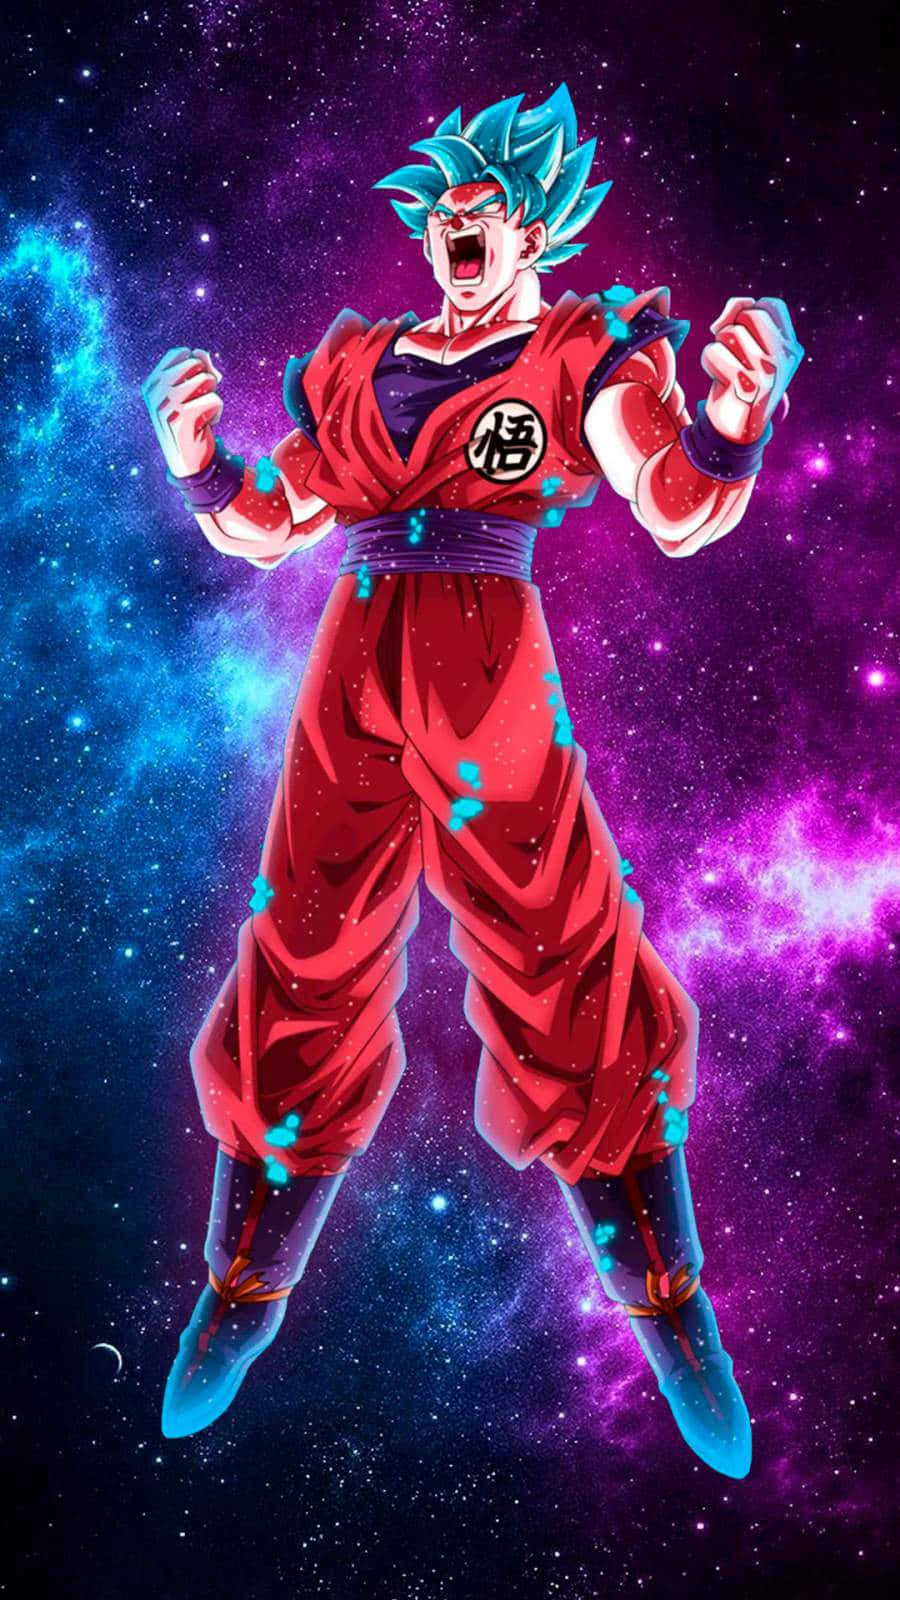 Dragon Ball Wallpapers I created For iPhone, Android, etc Enjoy